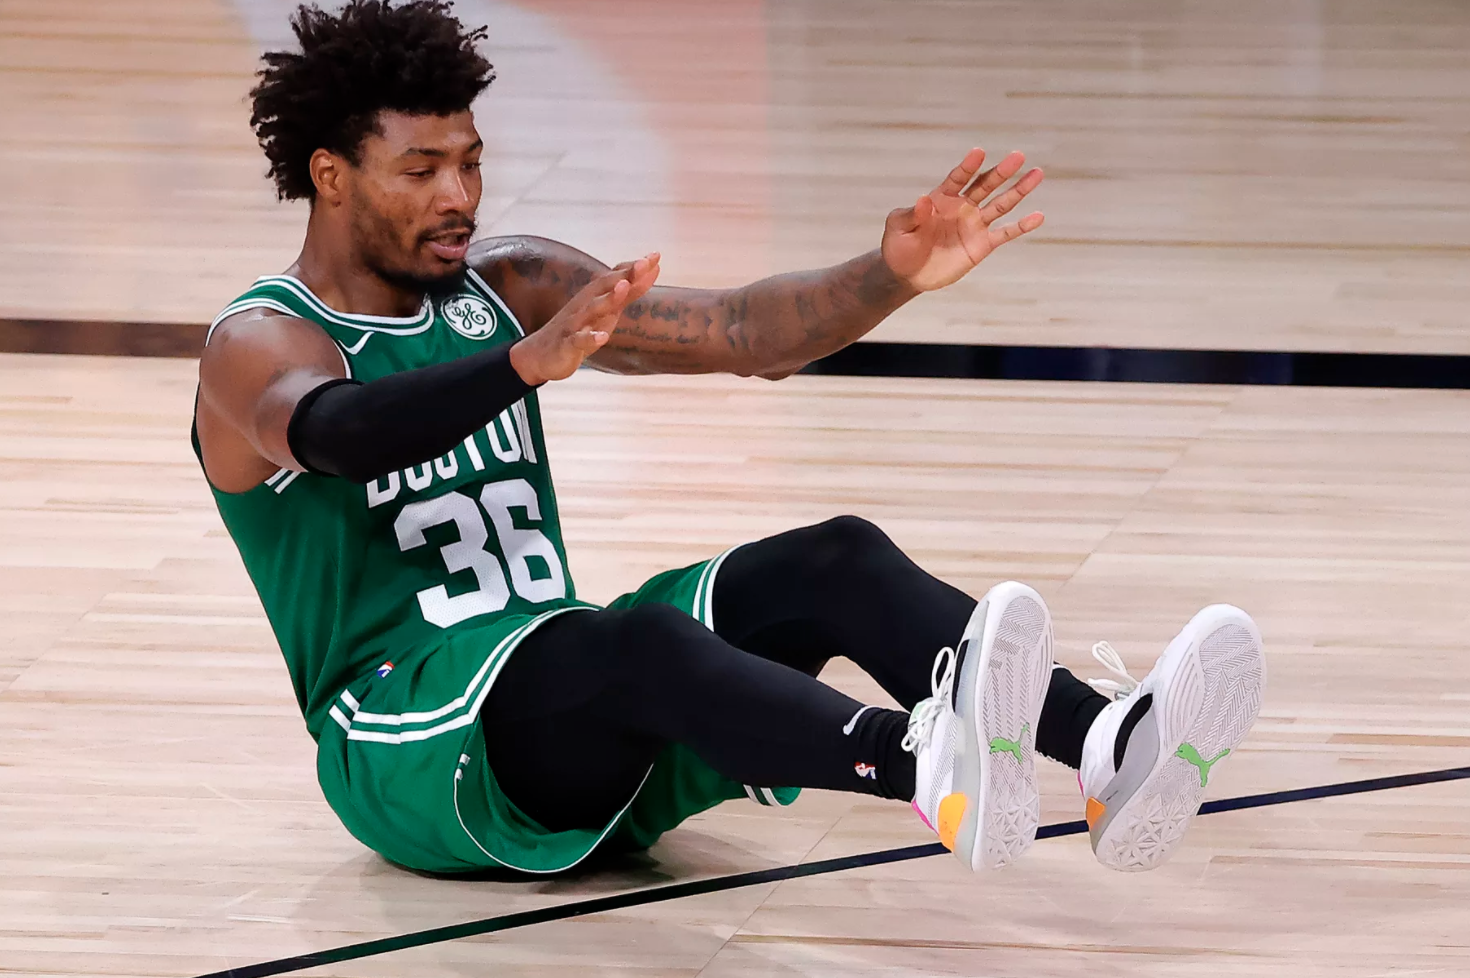 Marcus Smart named Rookie of the Month - CelticsBlog